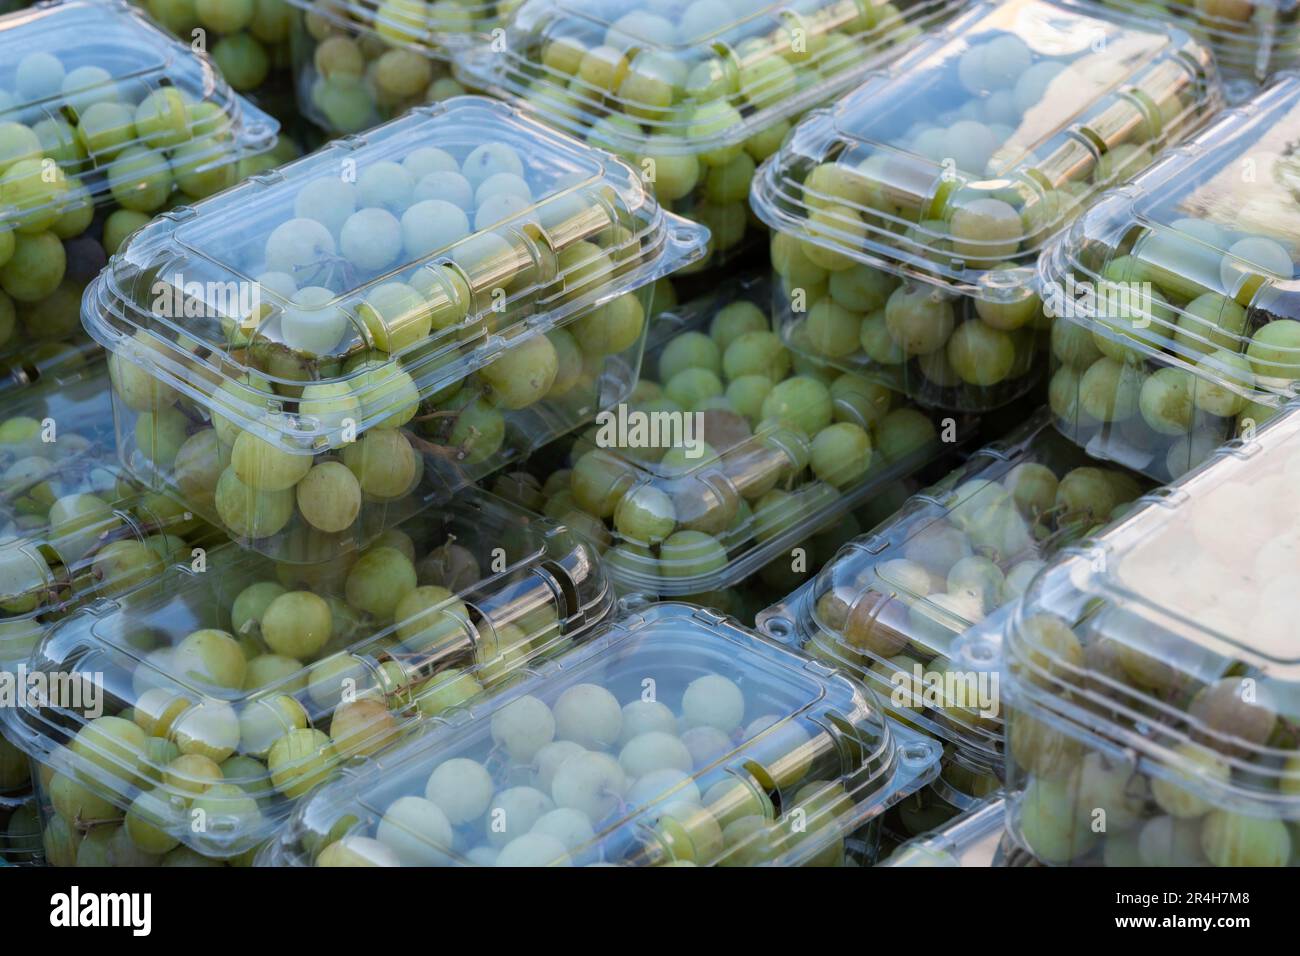 White grapes packed in transparent plastic boxes in a supermarket Stock Photo